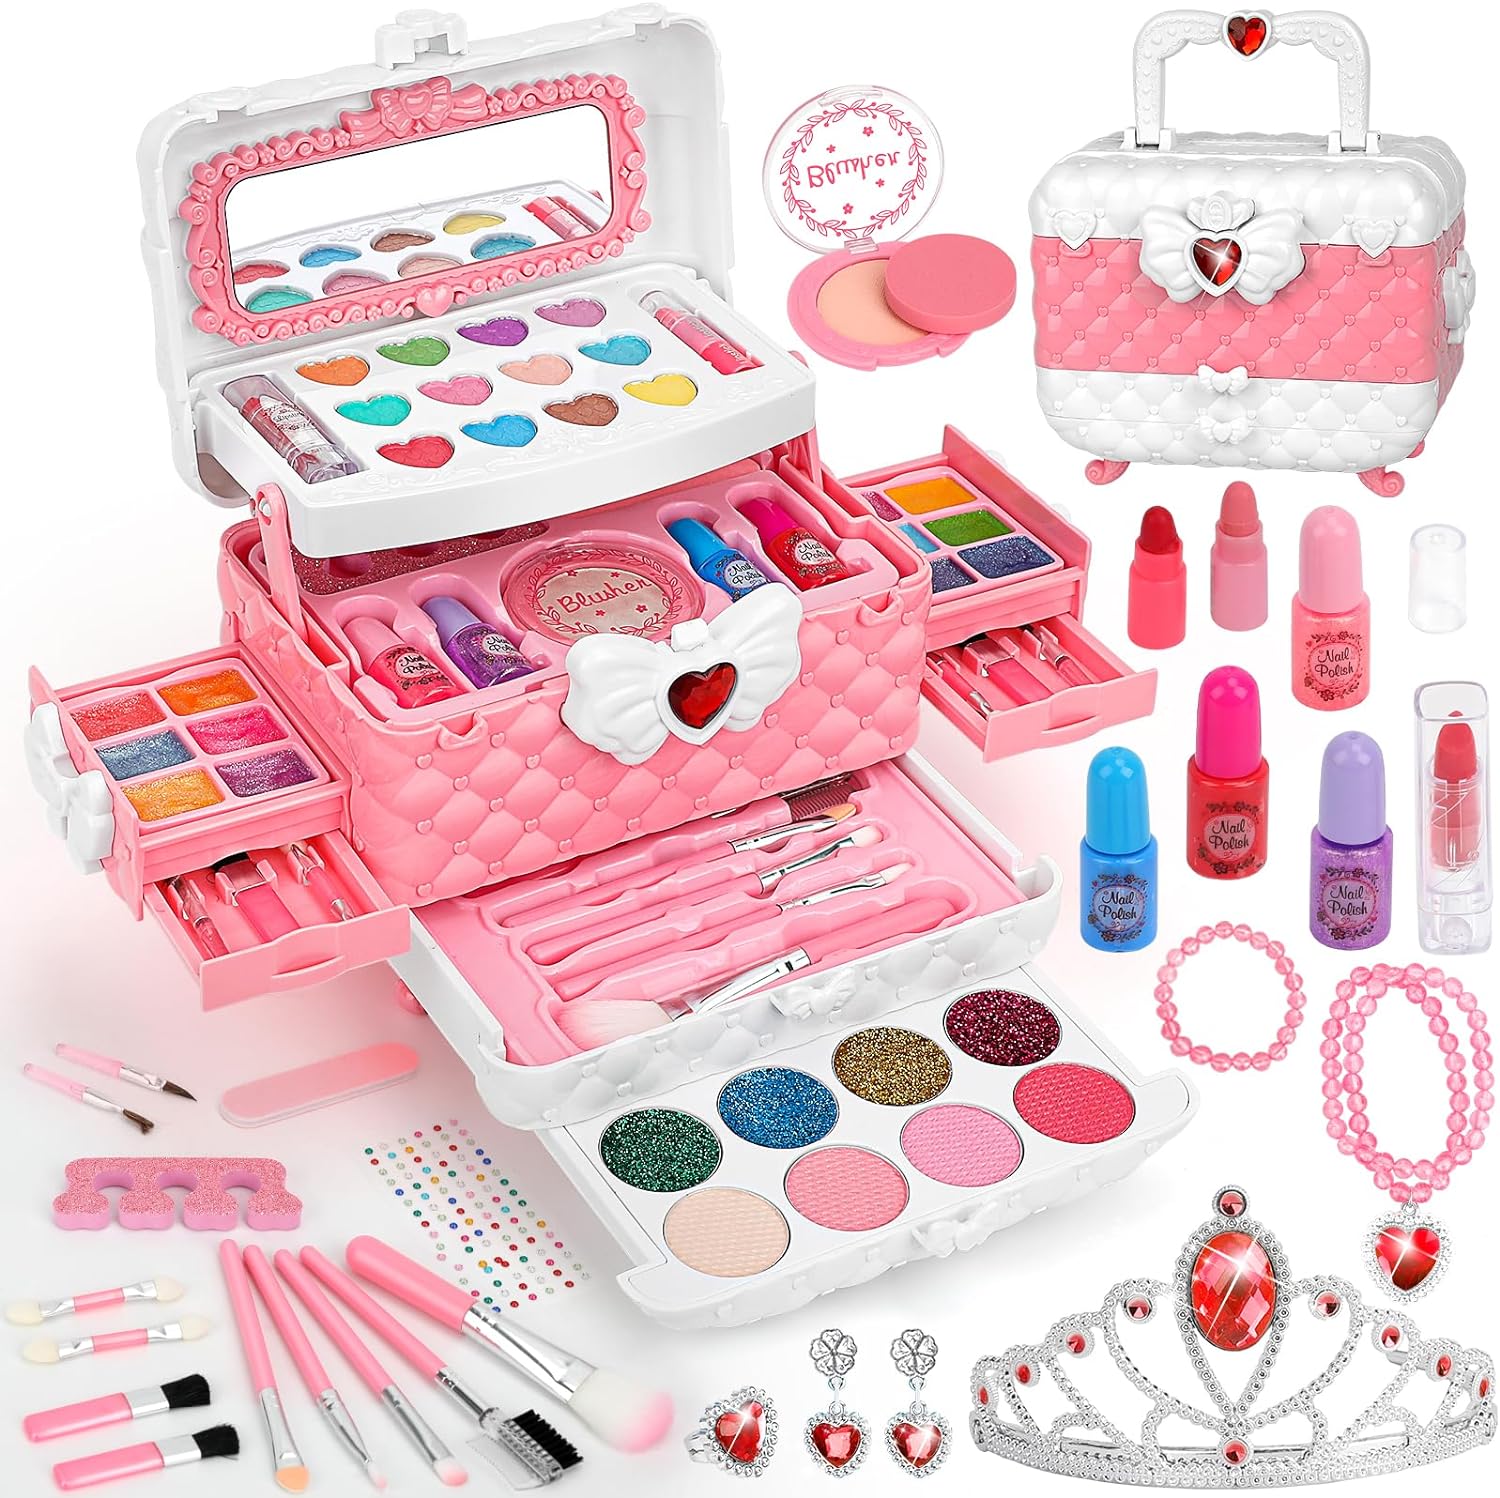 You are currently viewing Teensymic Kids Makeup Kit Review